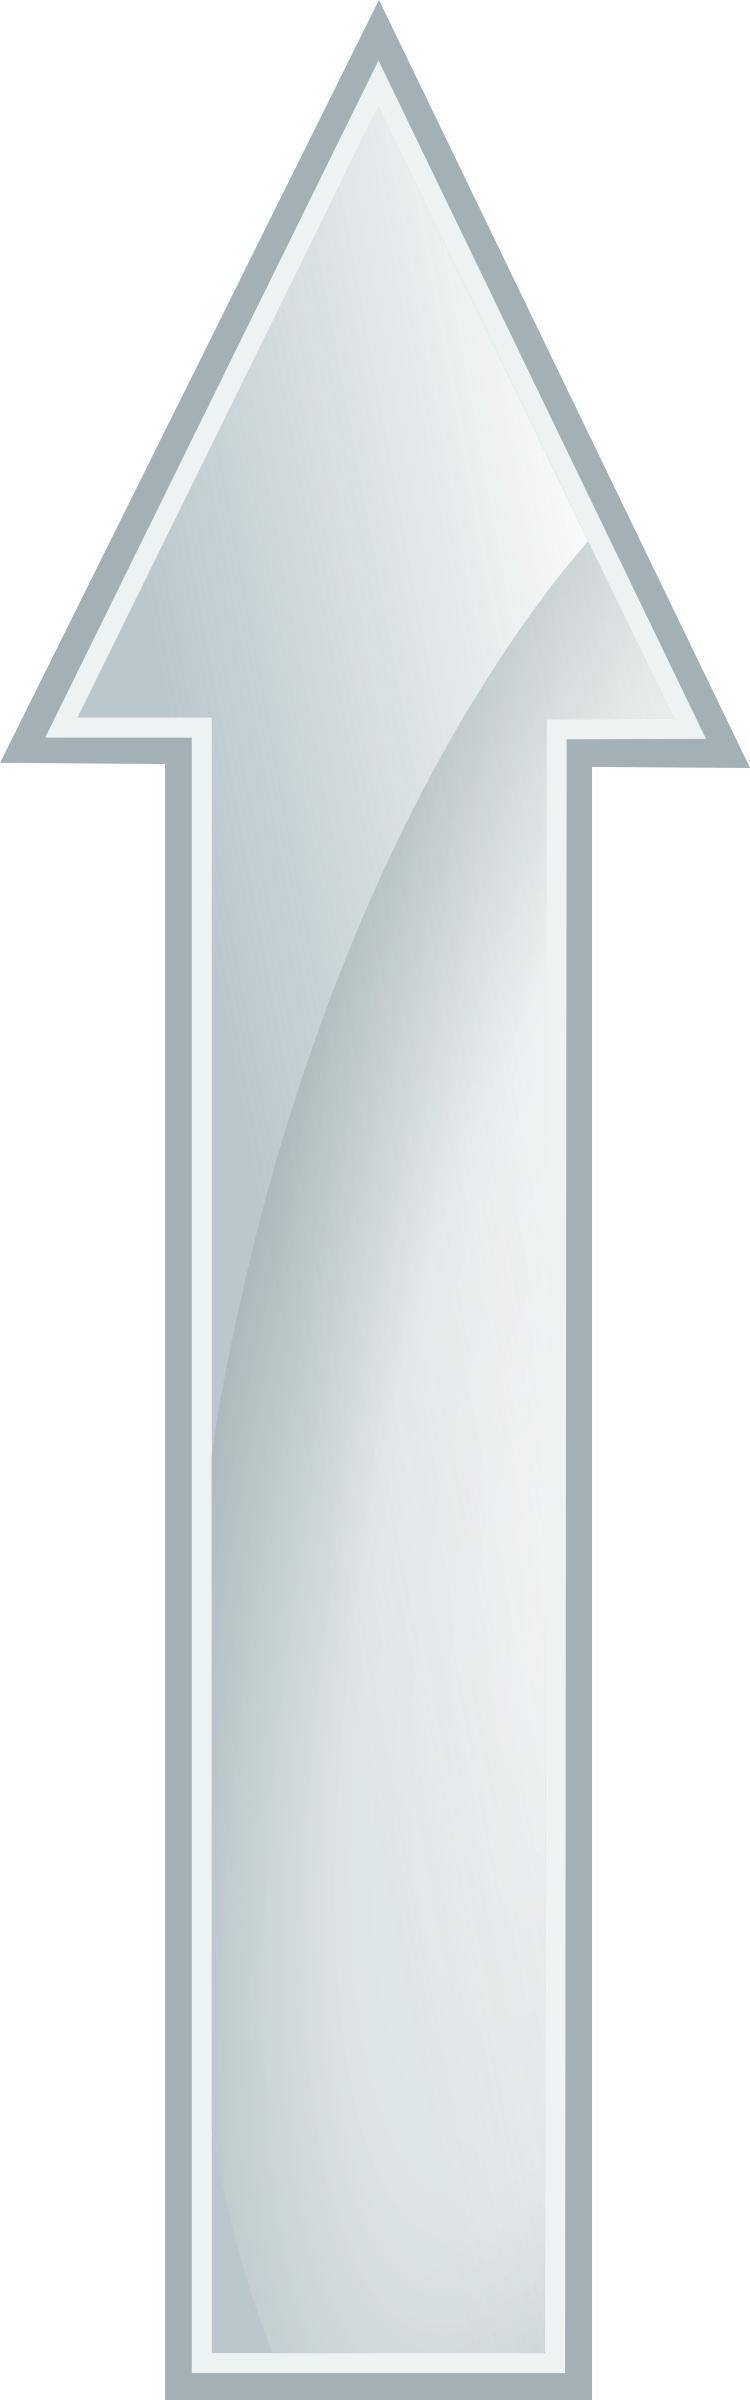 Glossy White Arrow png transparent